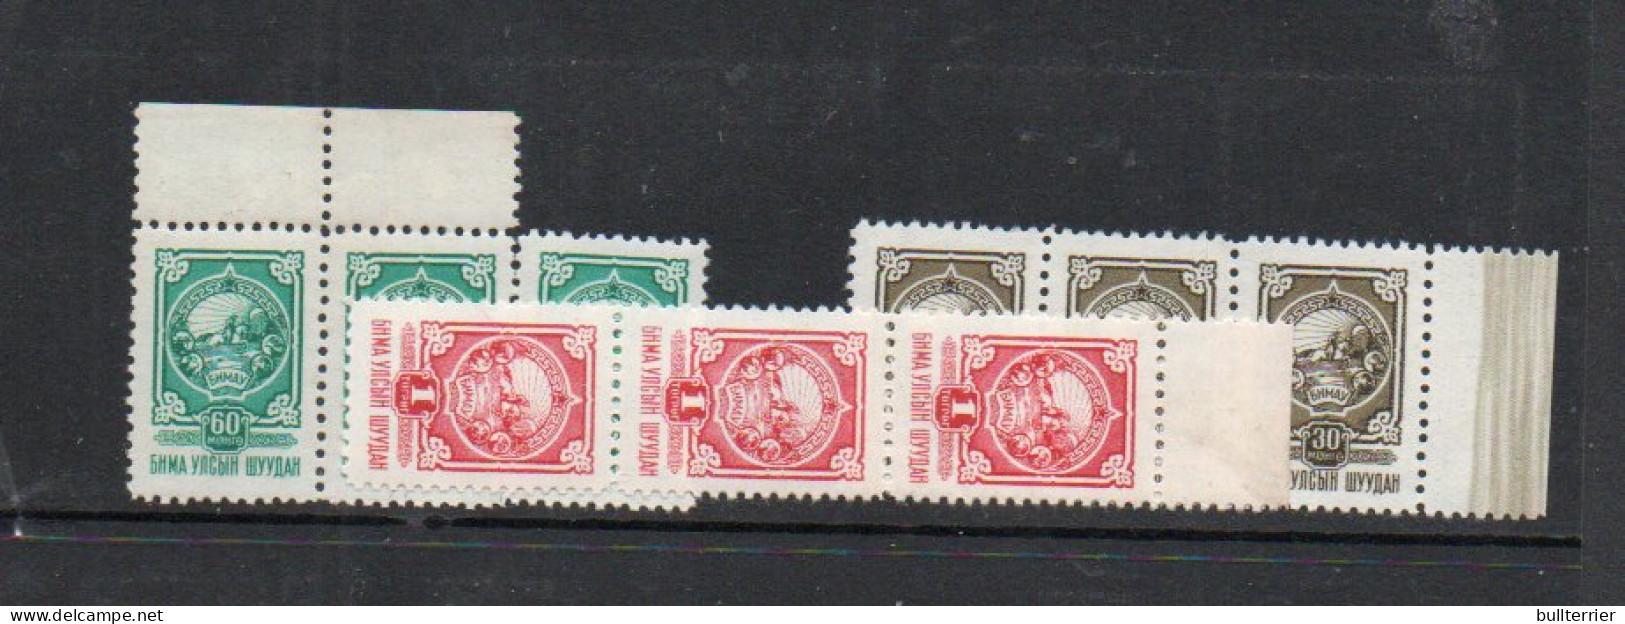 MONGOLIA - 1956- ARMS  30M,60M AND 1T X 3 OF EACH MINT NEVER HINGED,SG CAT £22.50 - Mongolia